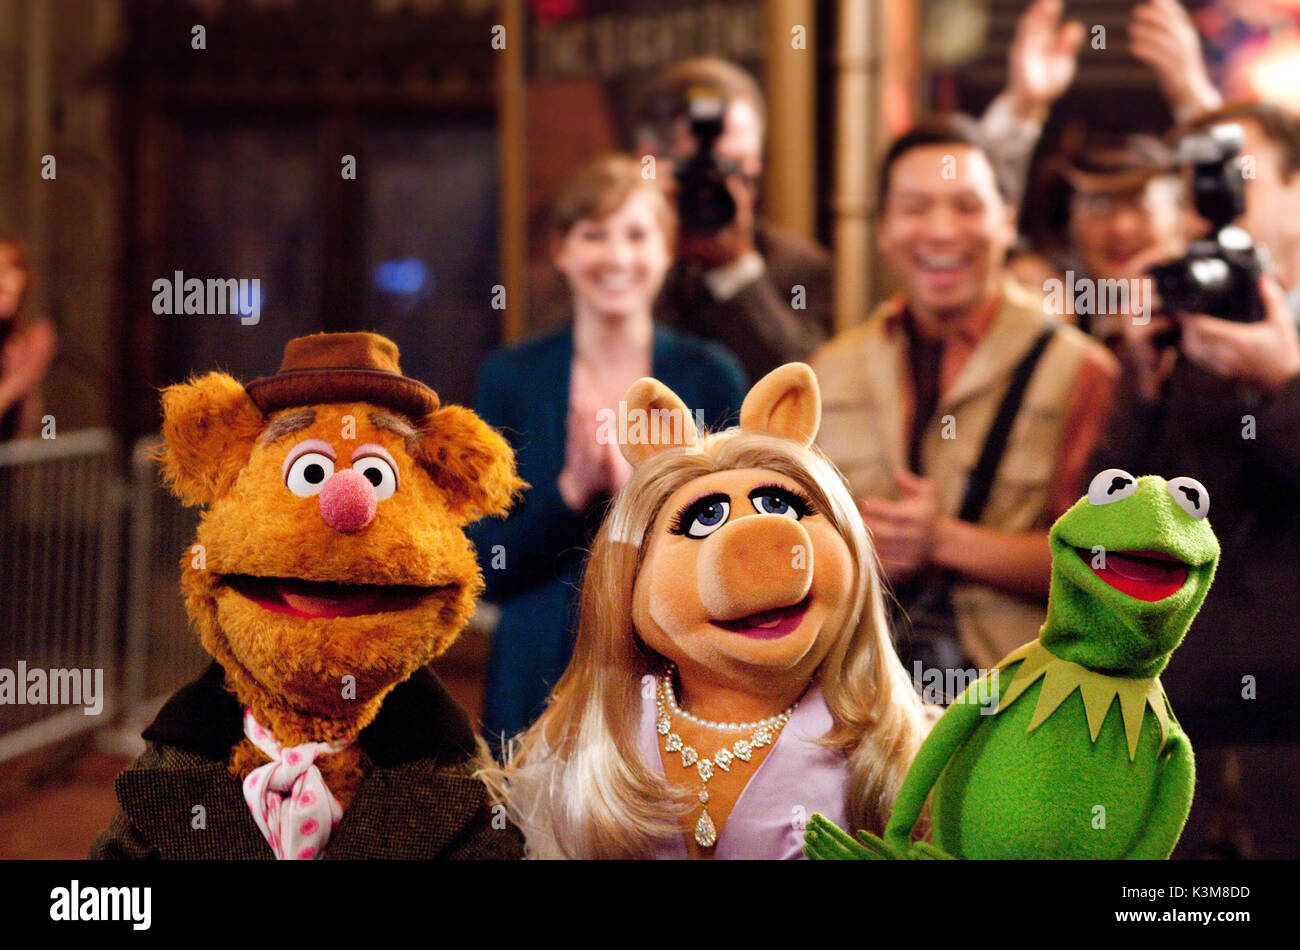 THE MUPPETS ERIC JACOBSON voices Miss Piggy & Fozzie Bear, STEVE WHITMIRE voices Kermit the Frog THE MUPPETS ERIC JACOBSON voices Miss Piggy & Fozzie Bear, STEVE WHITMIRE voices Kermit the Frog      Date: 2011 Stock Photo